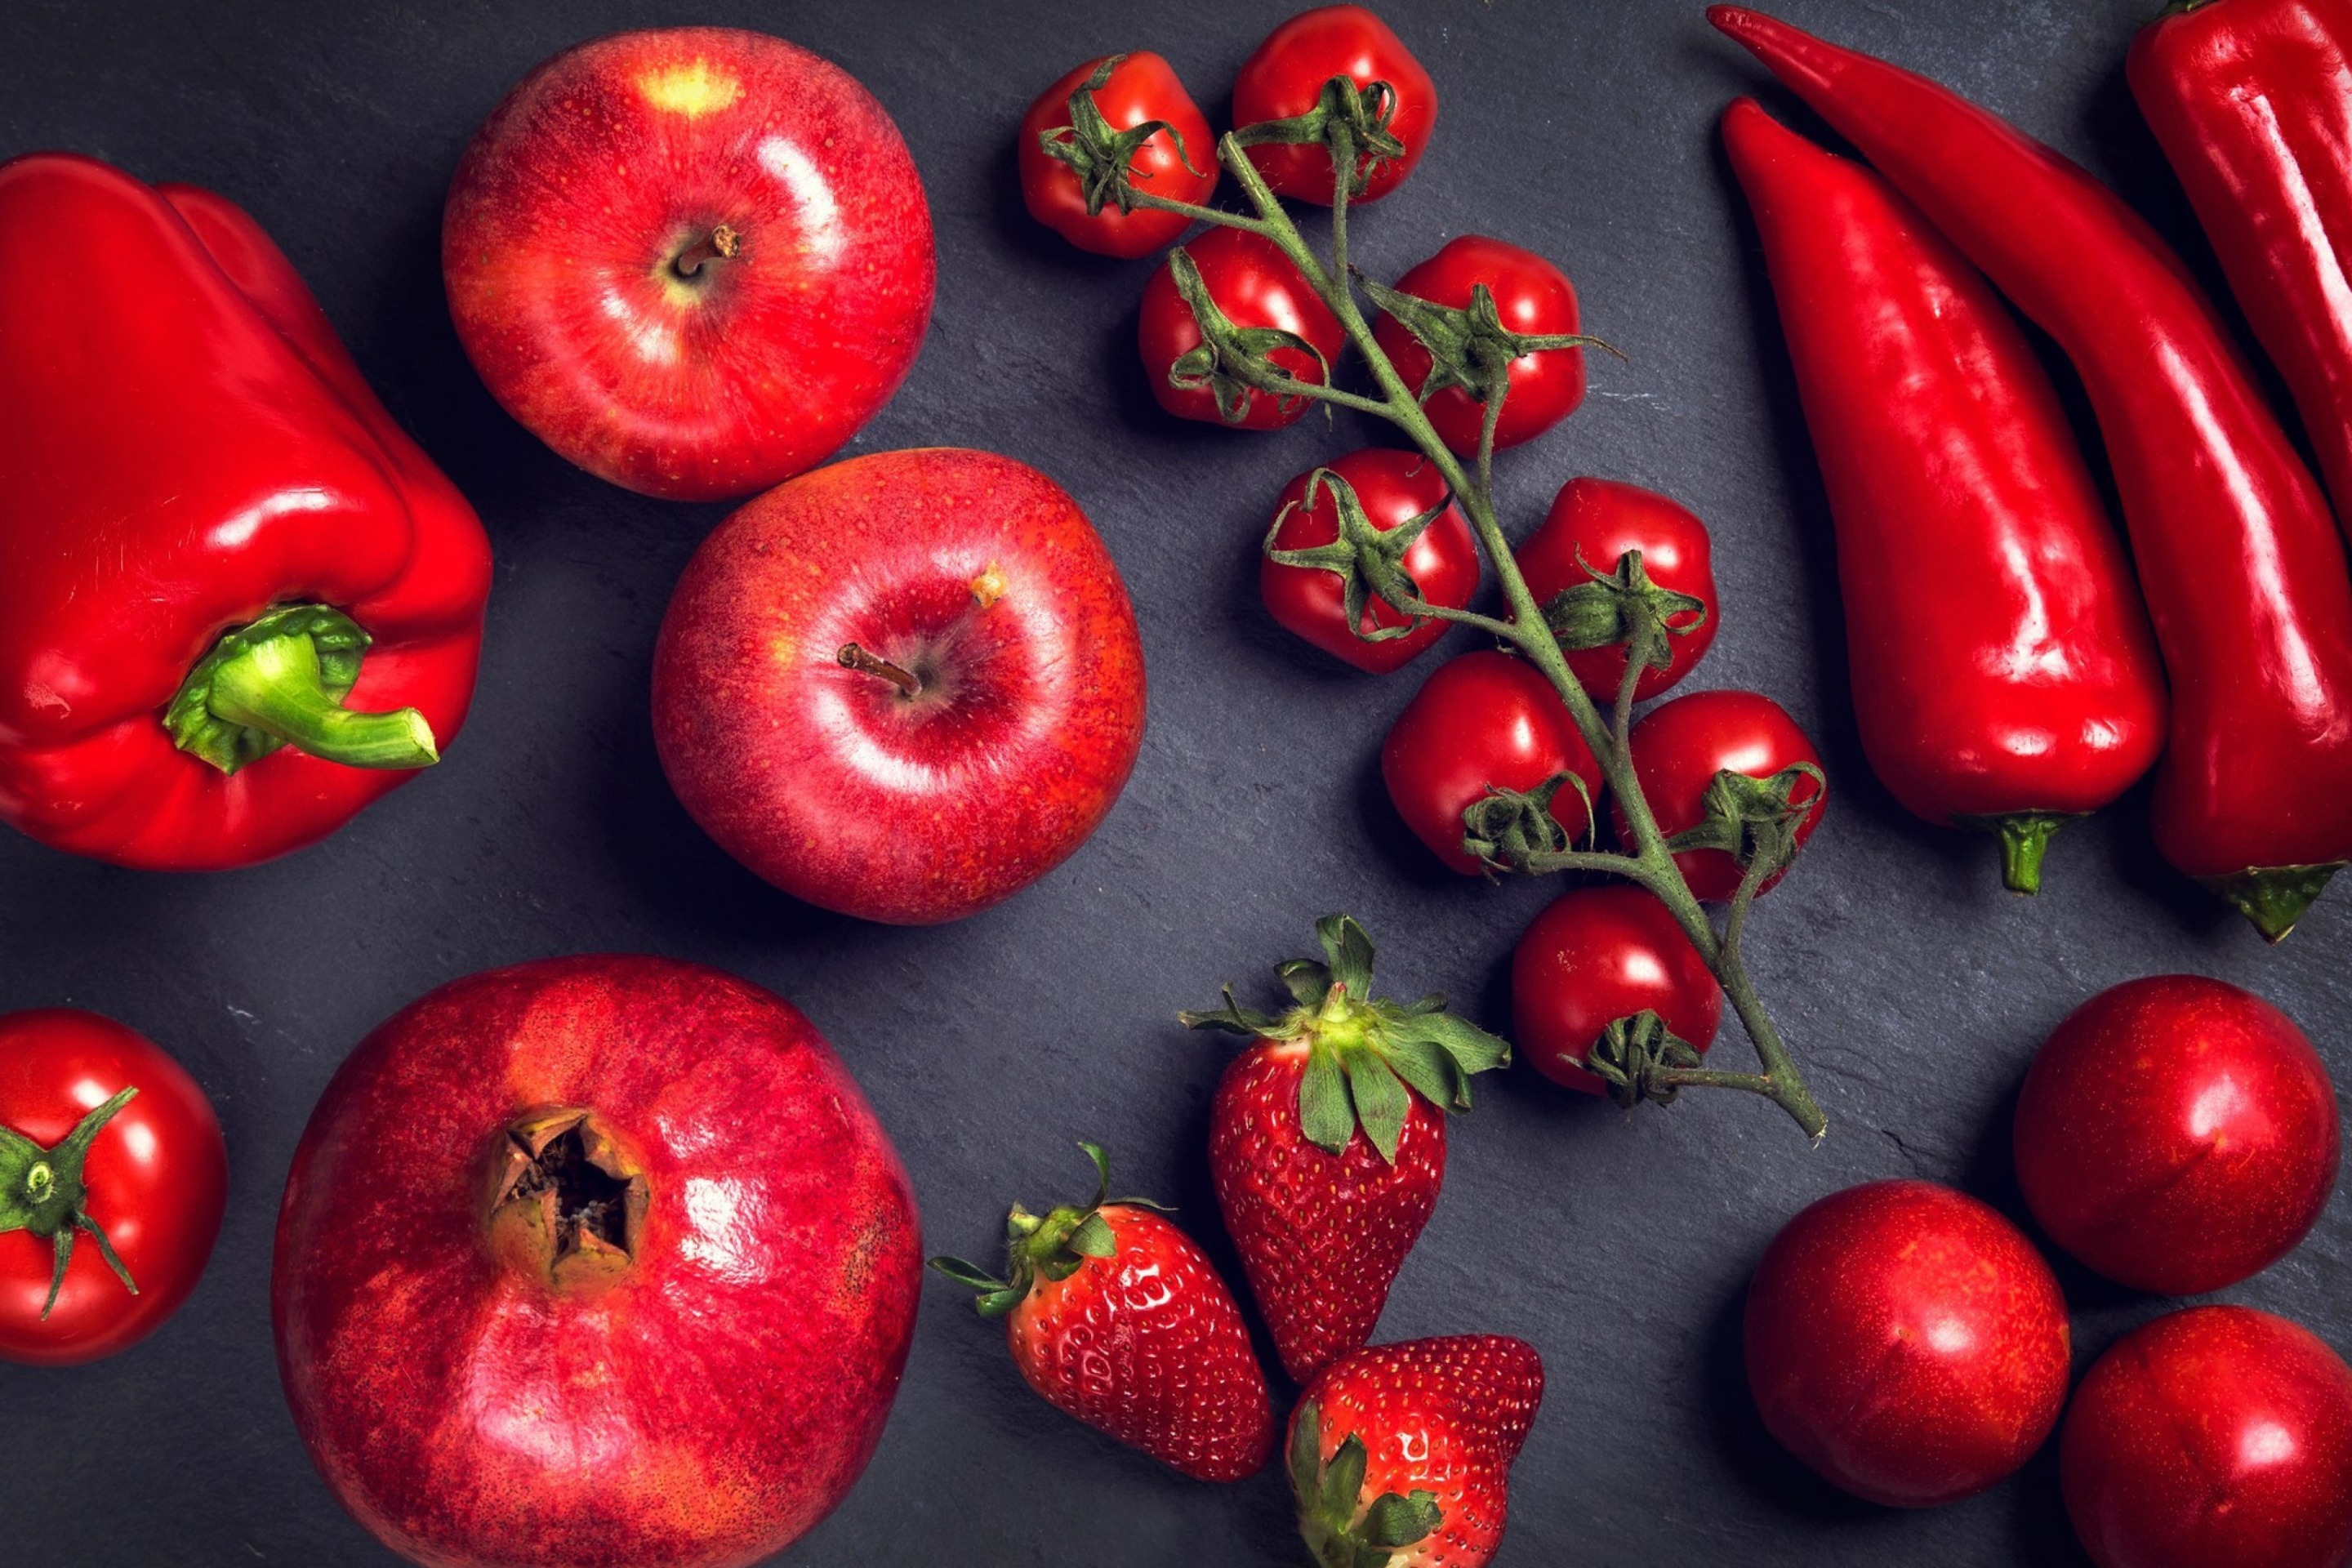 Red fruits and vegetables screenshot #1 2880x1920